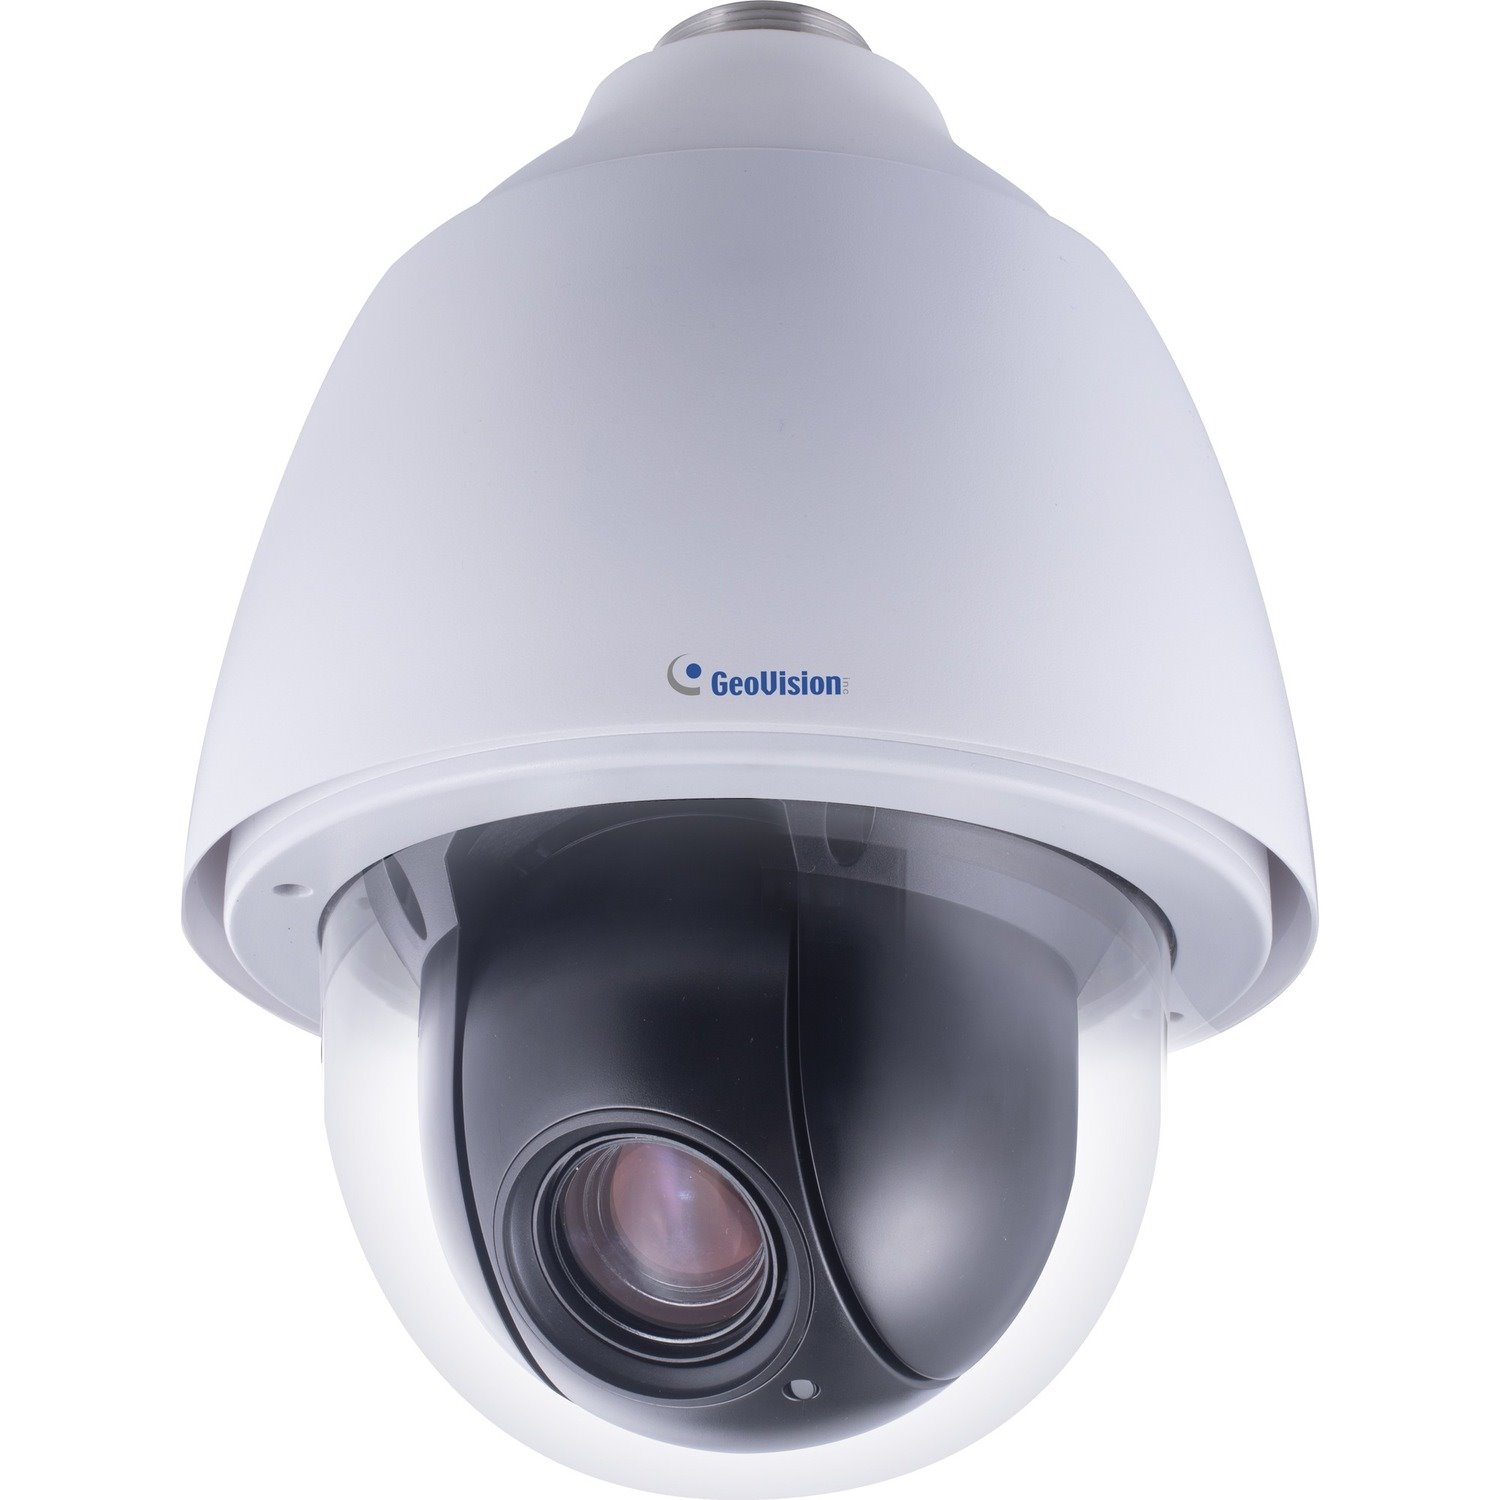 GeoVision GV-QSD5730-Outdoor 5 Megapixel Outdoor Network Camera - Color - Dome